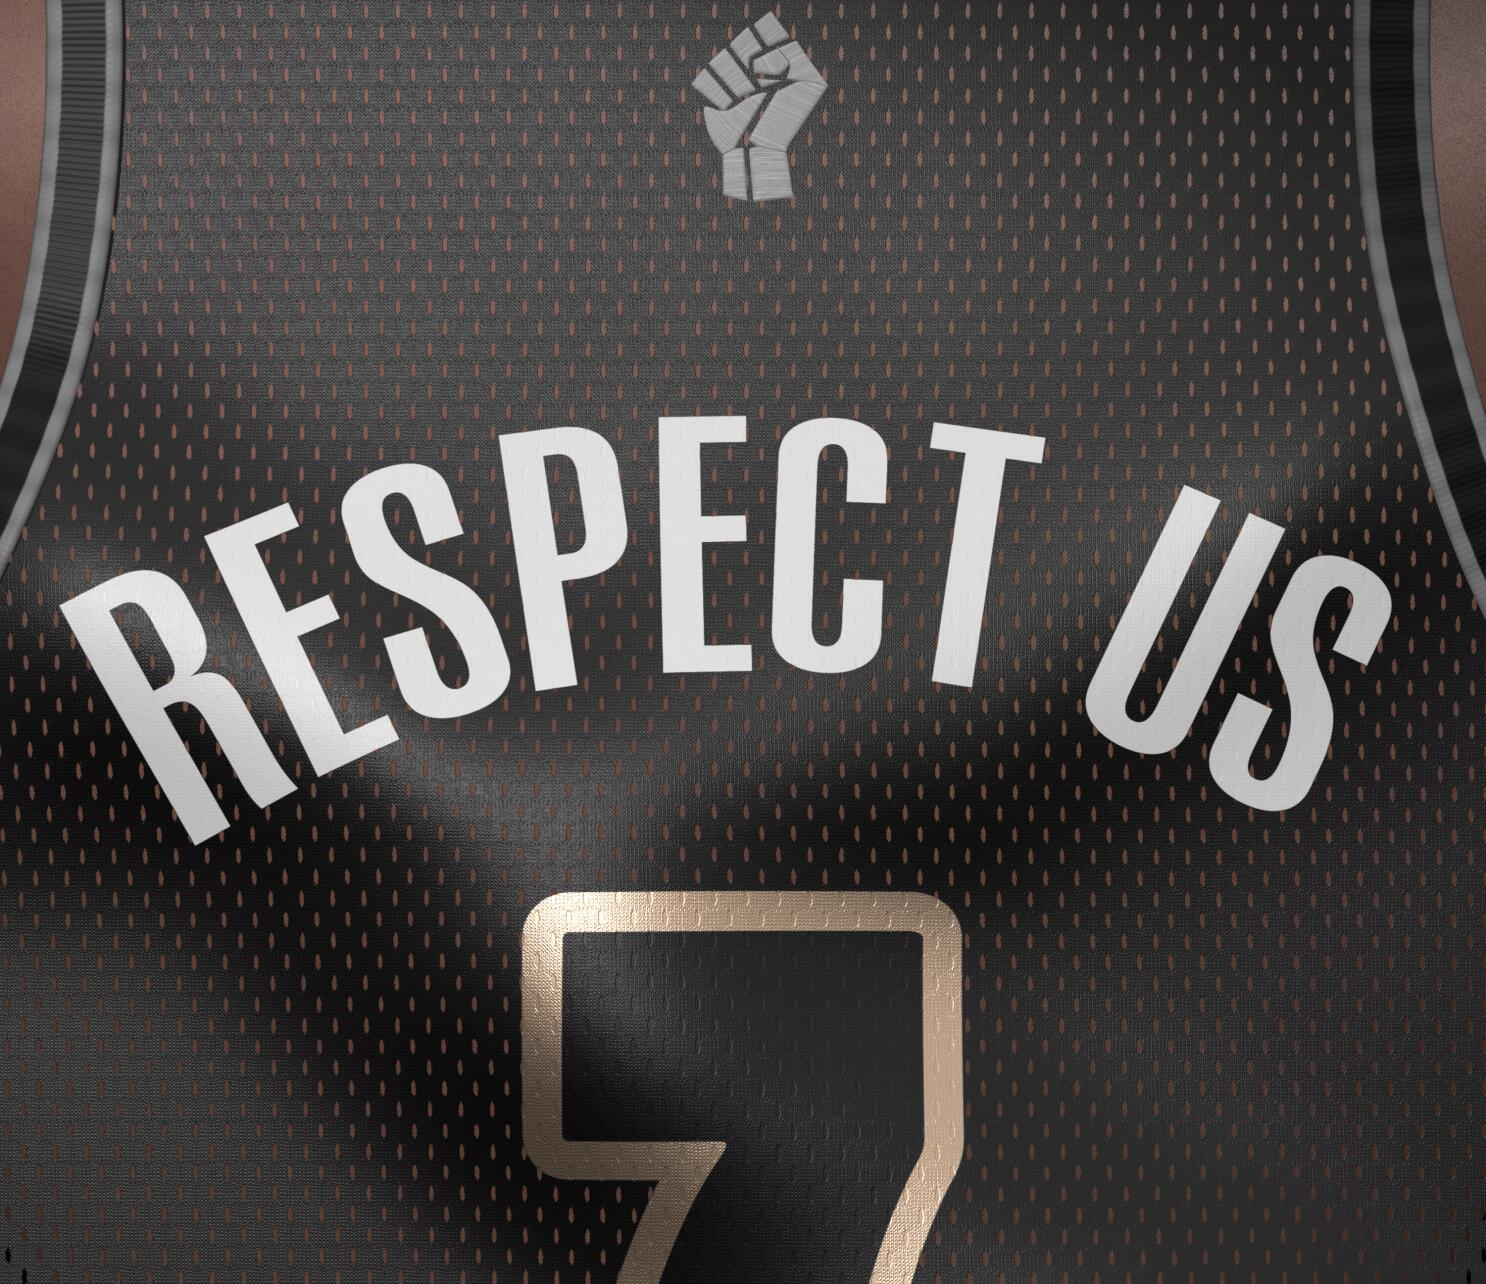 Social justice messages each NBA player is wearing on his jersey